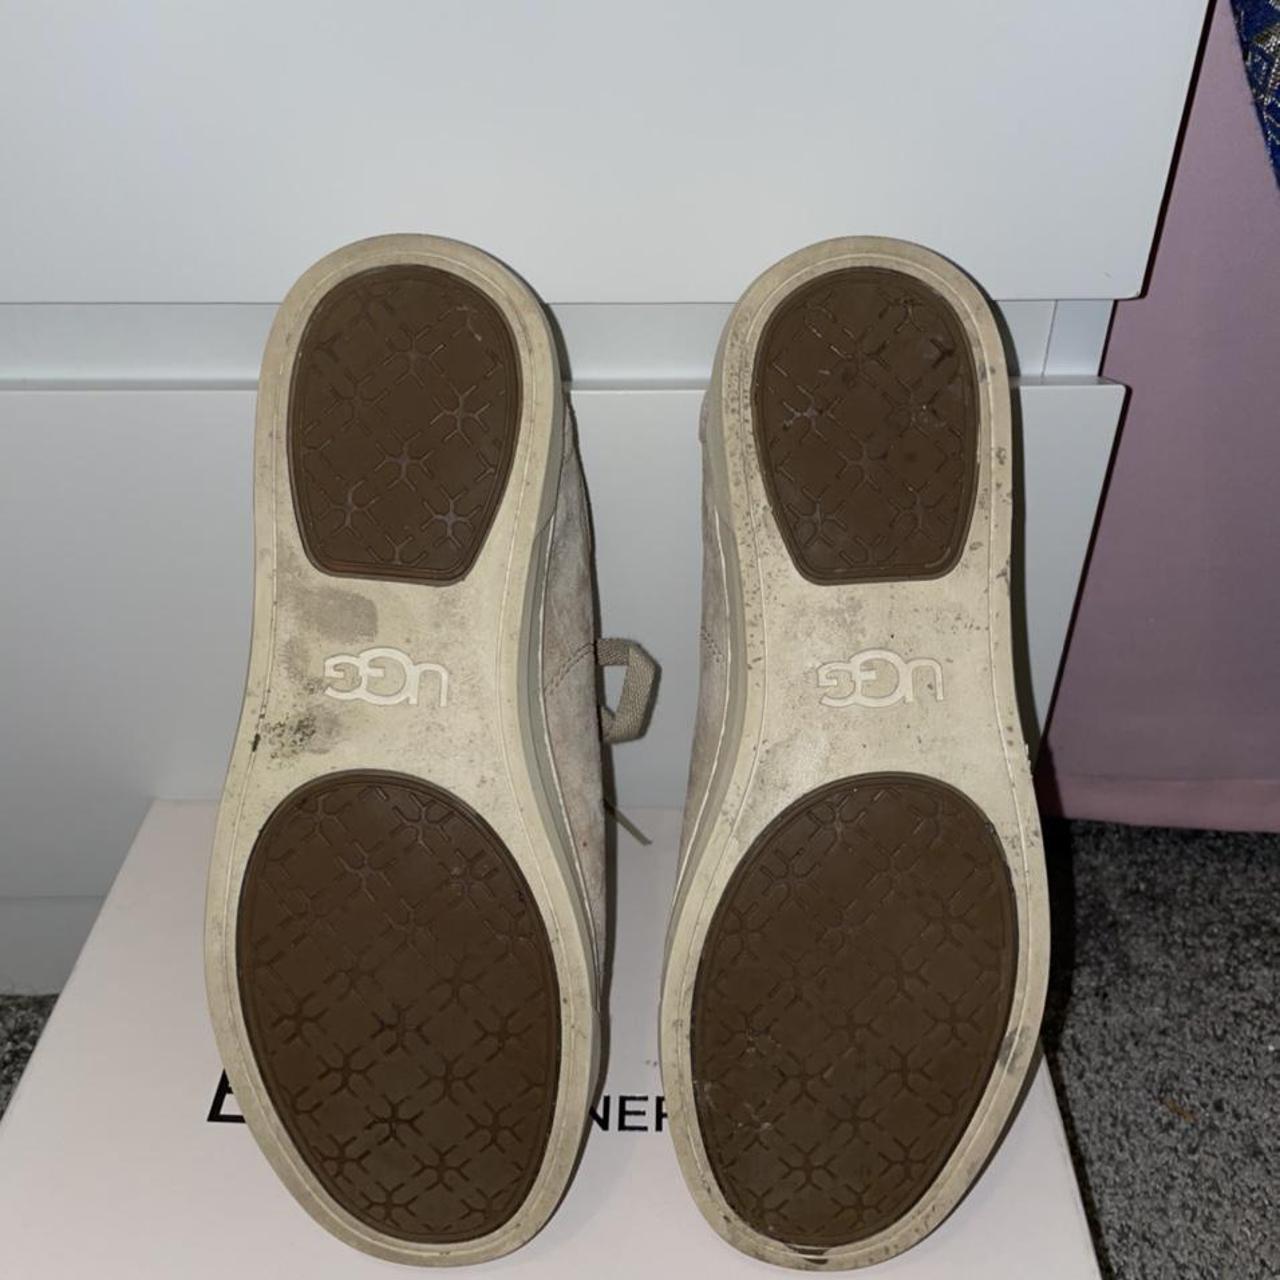 Product Image 4 - ✨Beige UGG trainers✨

Beautiful beige coloured